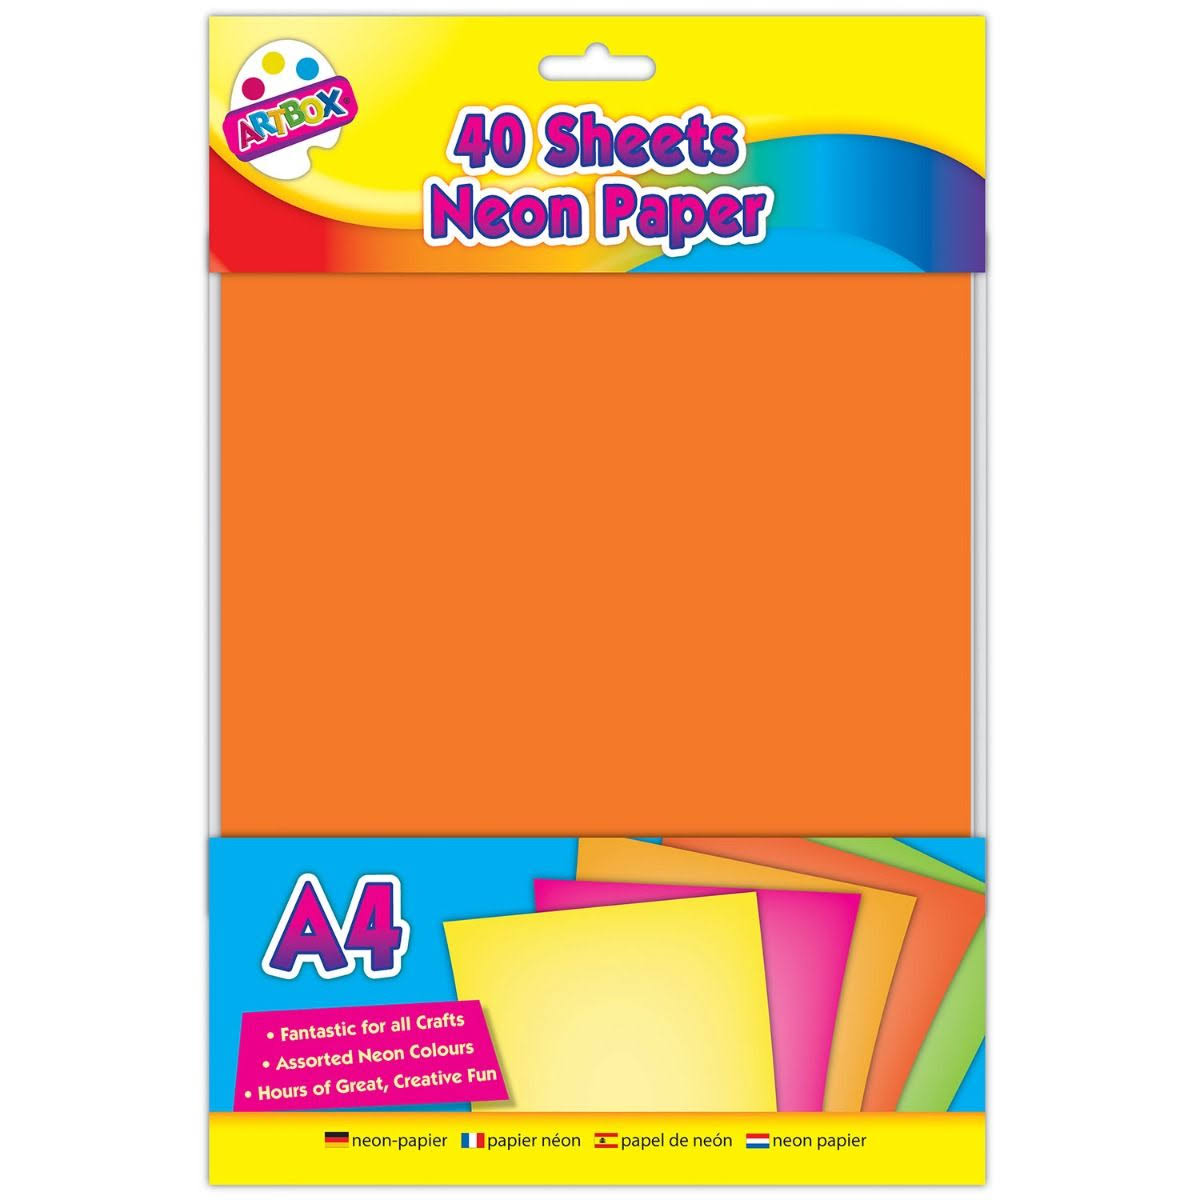 40 Sheets A4 Neon Paper